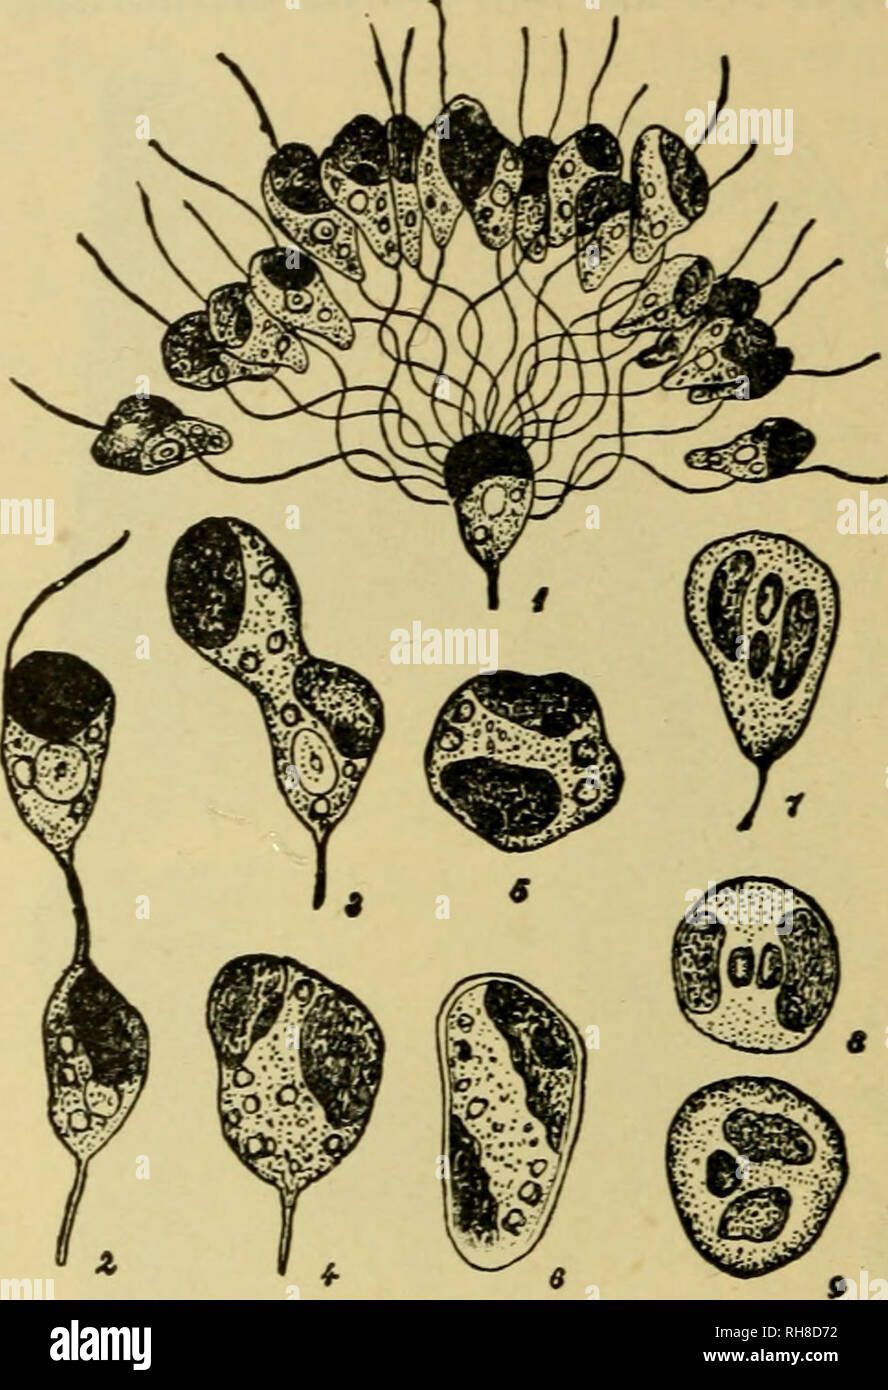 . Botany of the living plant. Botany; Plants. Fig. 284. A, Pleurocladia lacustris. Uni- locular sporangium with its contents divided up into zoospores, a = eye-spot. chr = chromatophore. (After Klebahn.) B= Chorda filum, zoospores. (After Reinke.) (From Oltmanns' Algae.) Fig. 285. Ectocarpus siliculosus. i, female gamete sur- rounded by a number of male gametes. 2-5, stages in the fusion of gametes. 6, zygote after 24 hours. 7-9, fusion of the nuclei as seen in fixed and stained material. (1-5 after Berthold; 6-9 after Oltmanns.) (From Strasburger.) In the simplest of the Phaeophyceae, the Ect Stock Photo